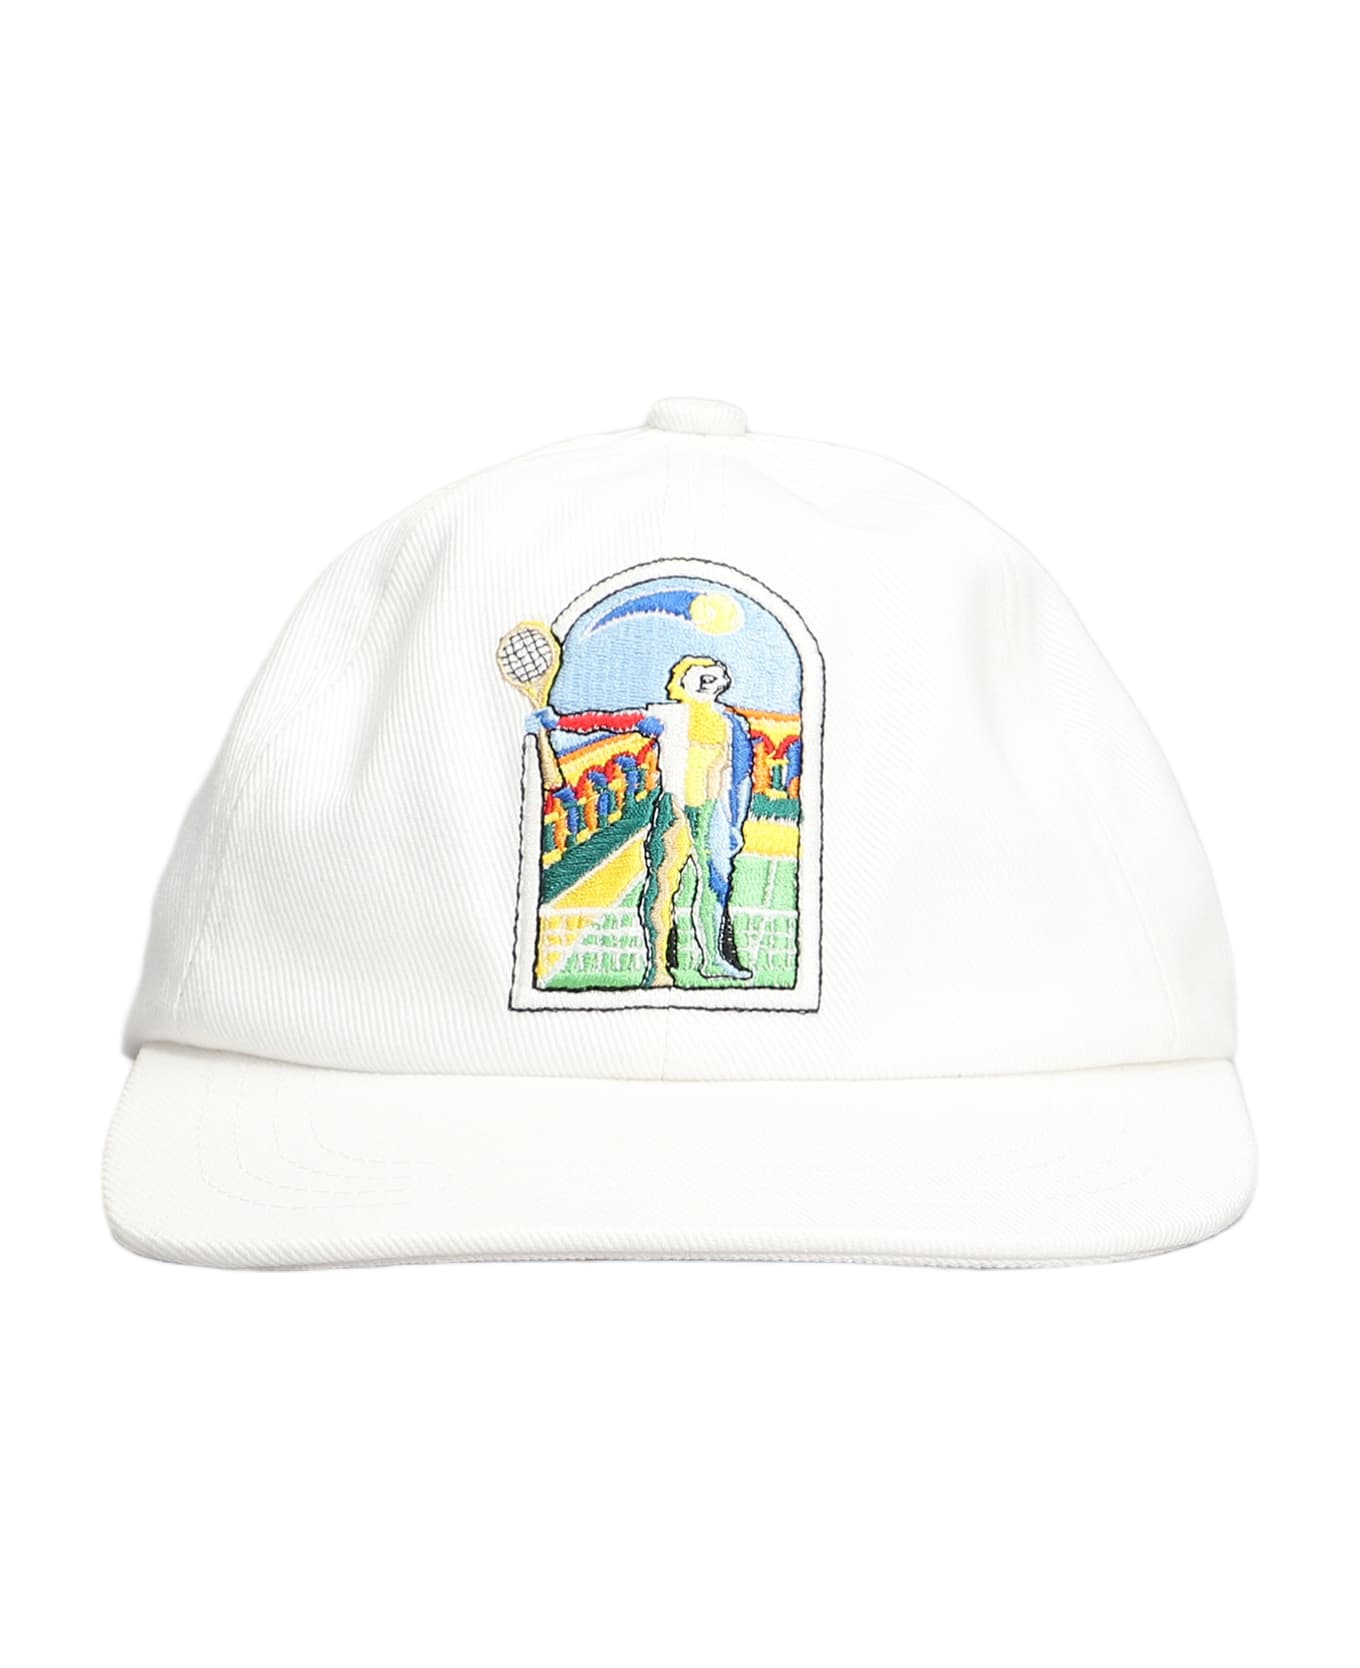 Casablanca White Baseball Hat With Front Embroidery - White 帽子